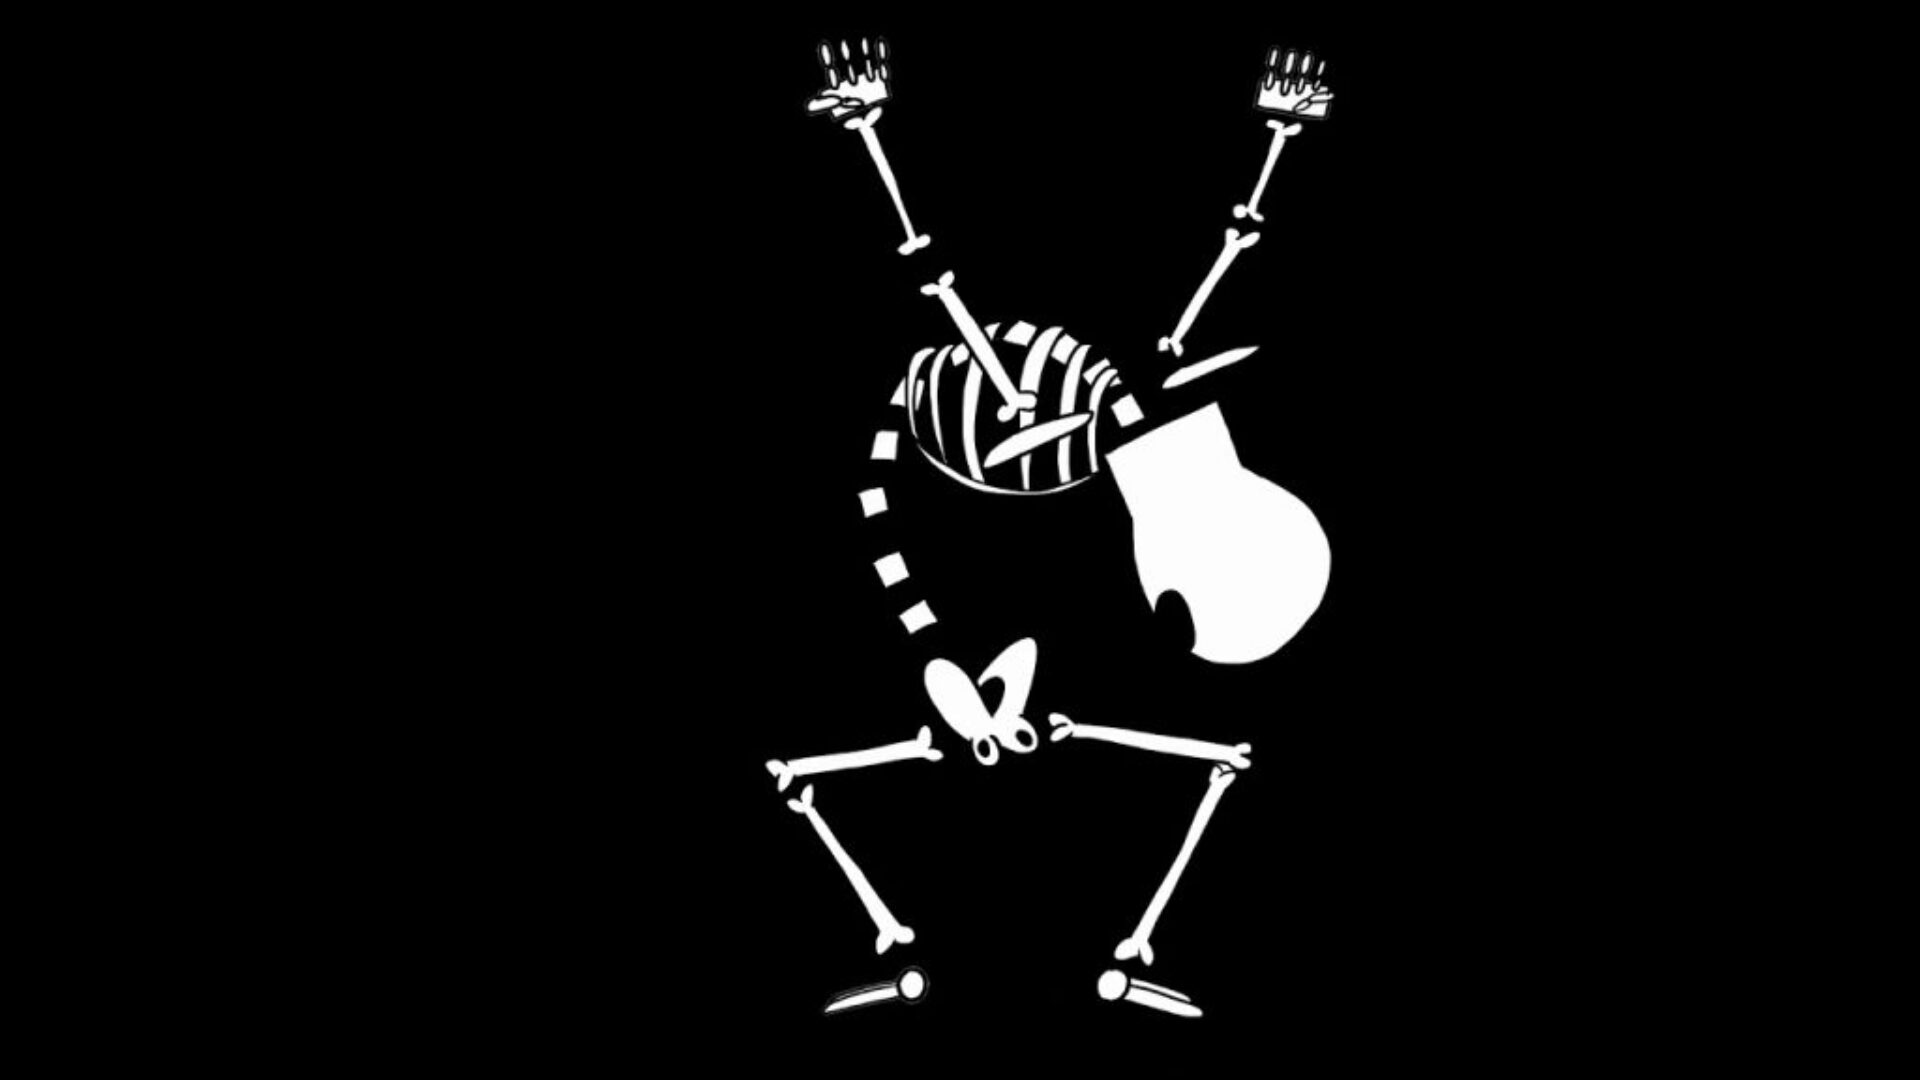 A skeleton bent over in a head bang